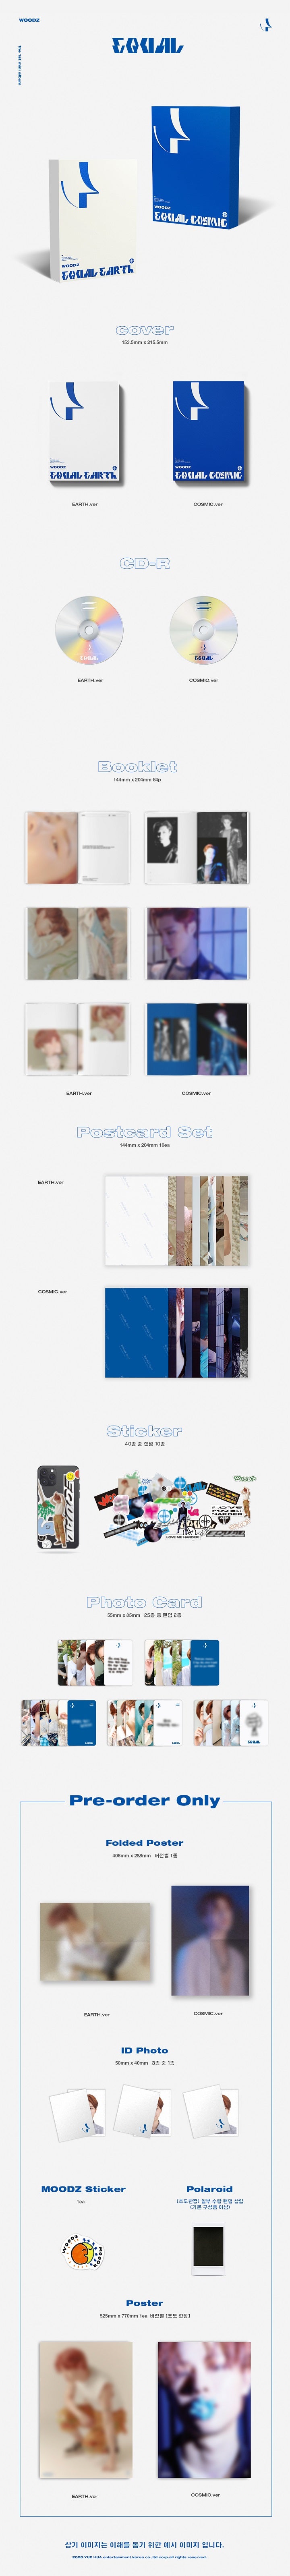 1 CD
1 Booklet (84 pages)
10 Postcard
10 Sticker
2 Photo Cards